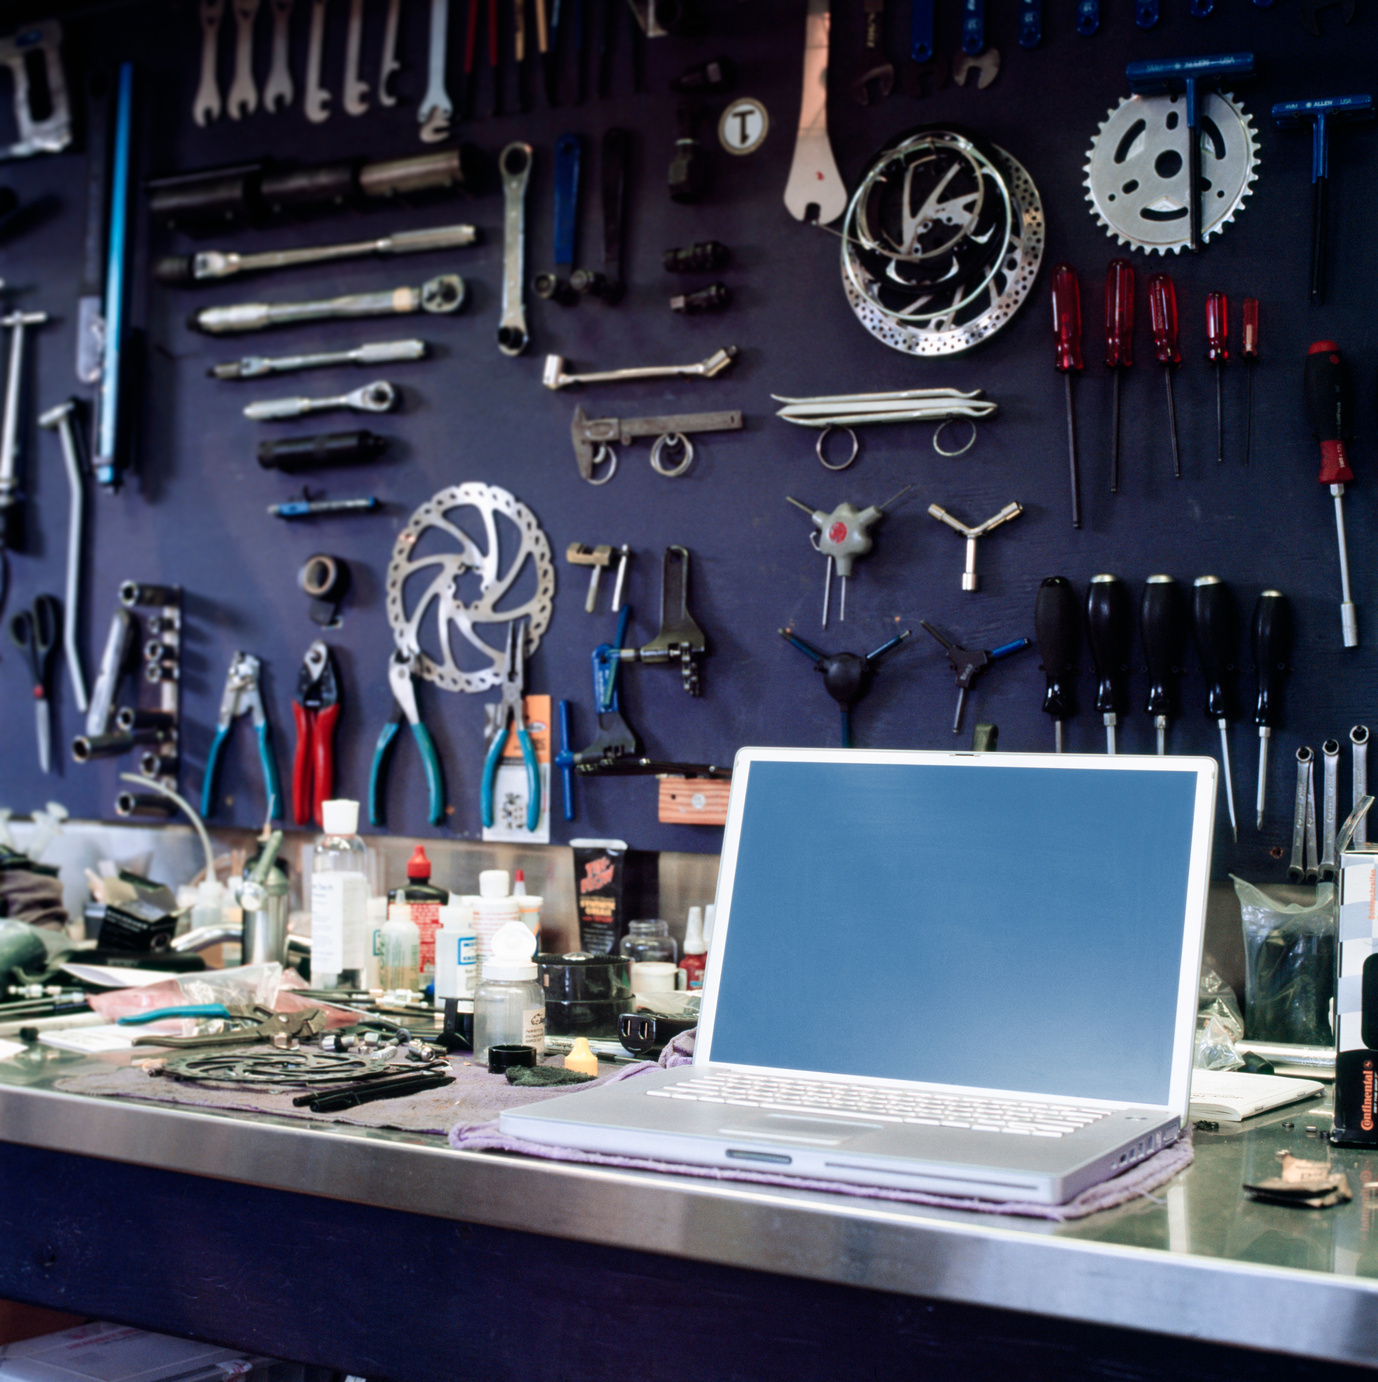 Laptop computer with blank monitor screen on workbench in bike shop. Small businesses staying organized using technology tools.